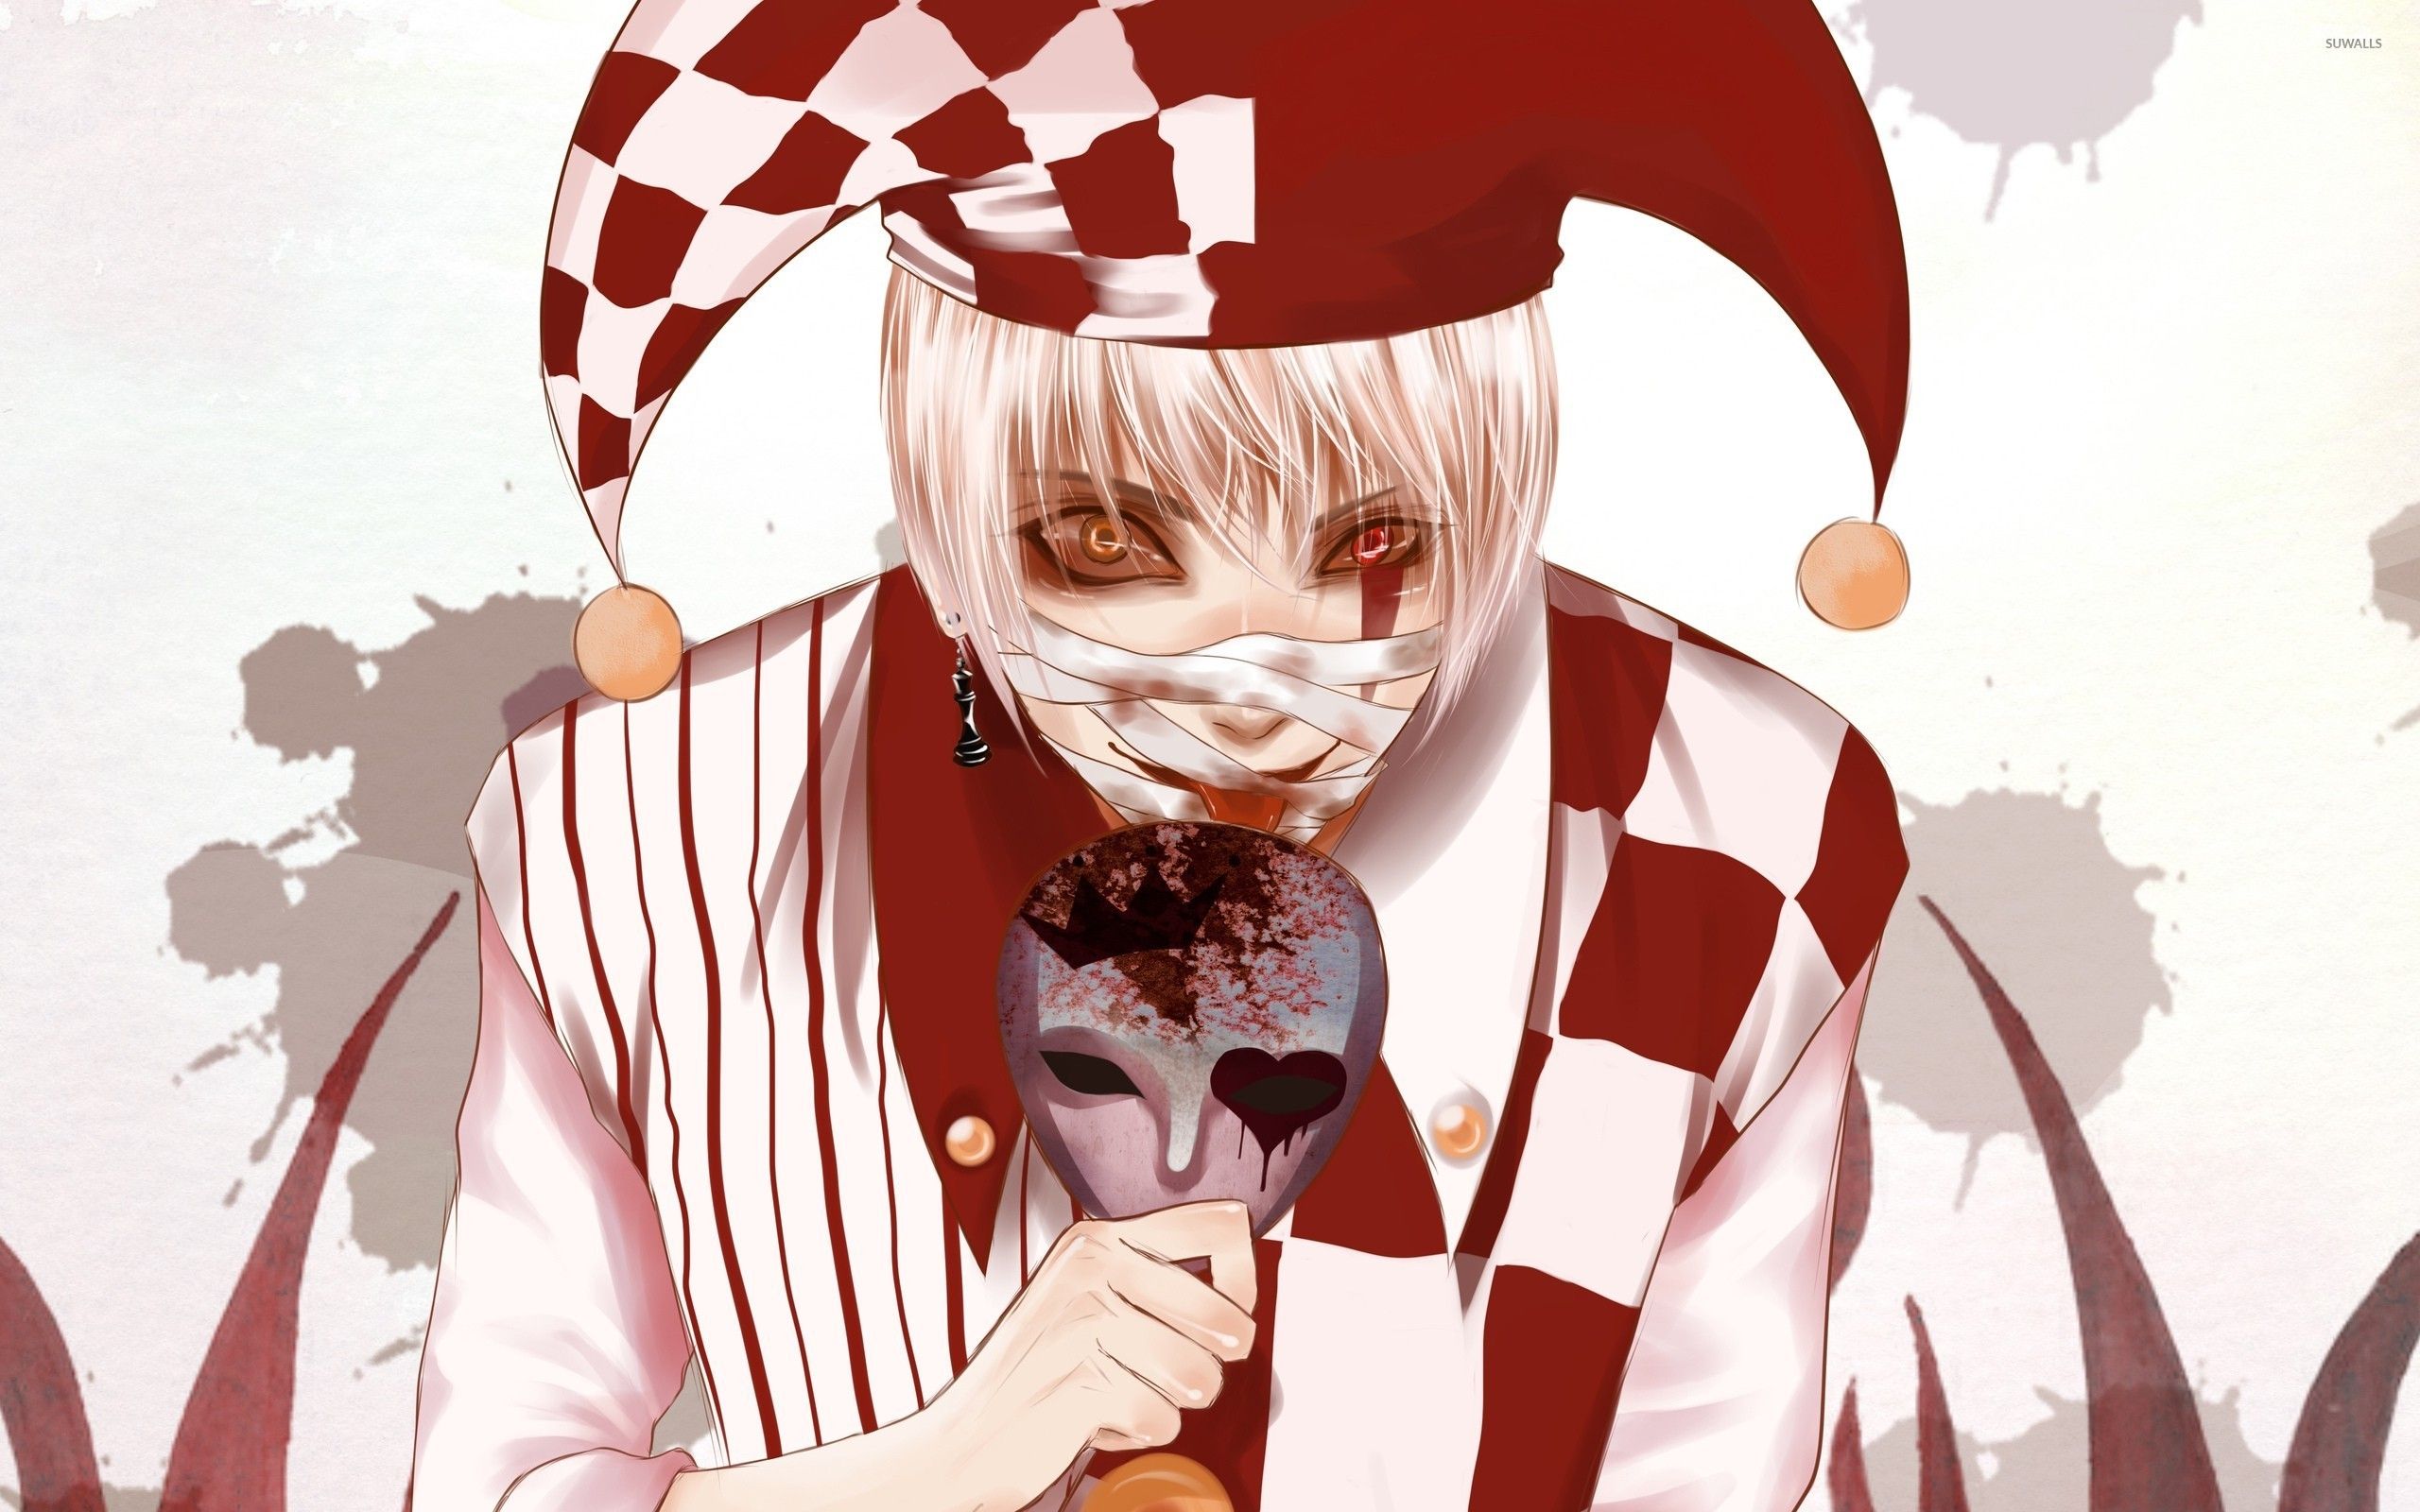 White and red clown with a mask wallpaper wallpaper